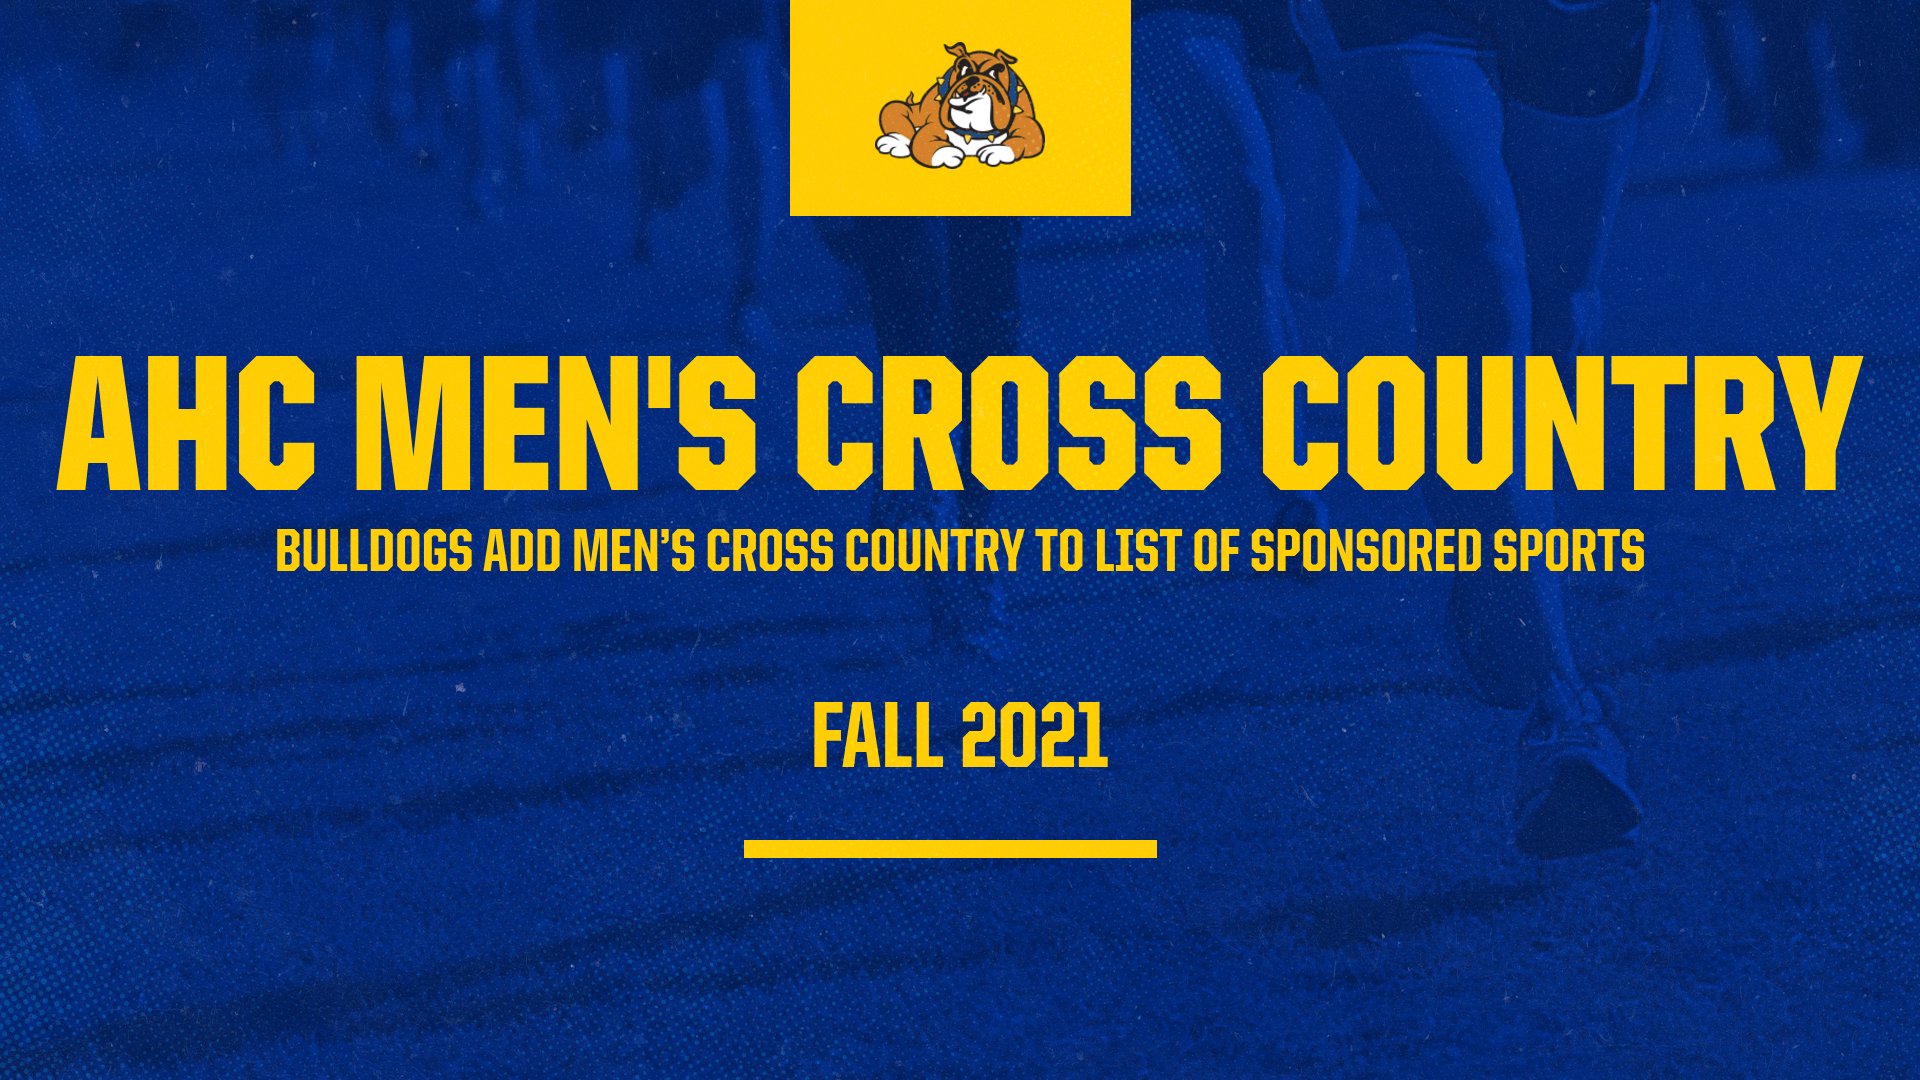 Allan Hancock to Add Men’s Cross Country for Fall 2021